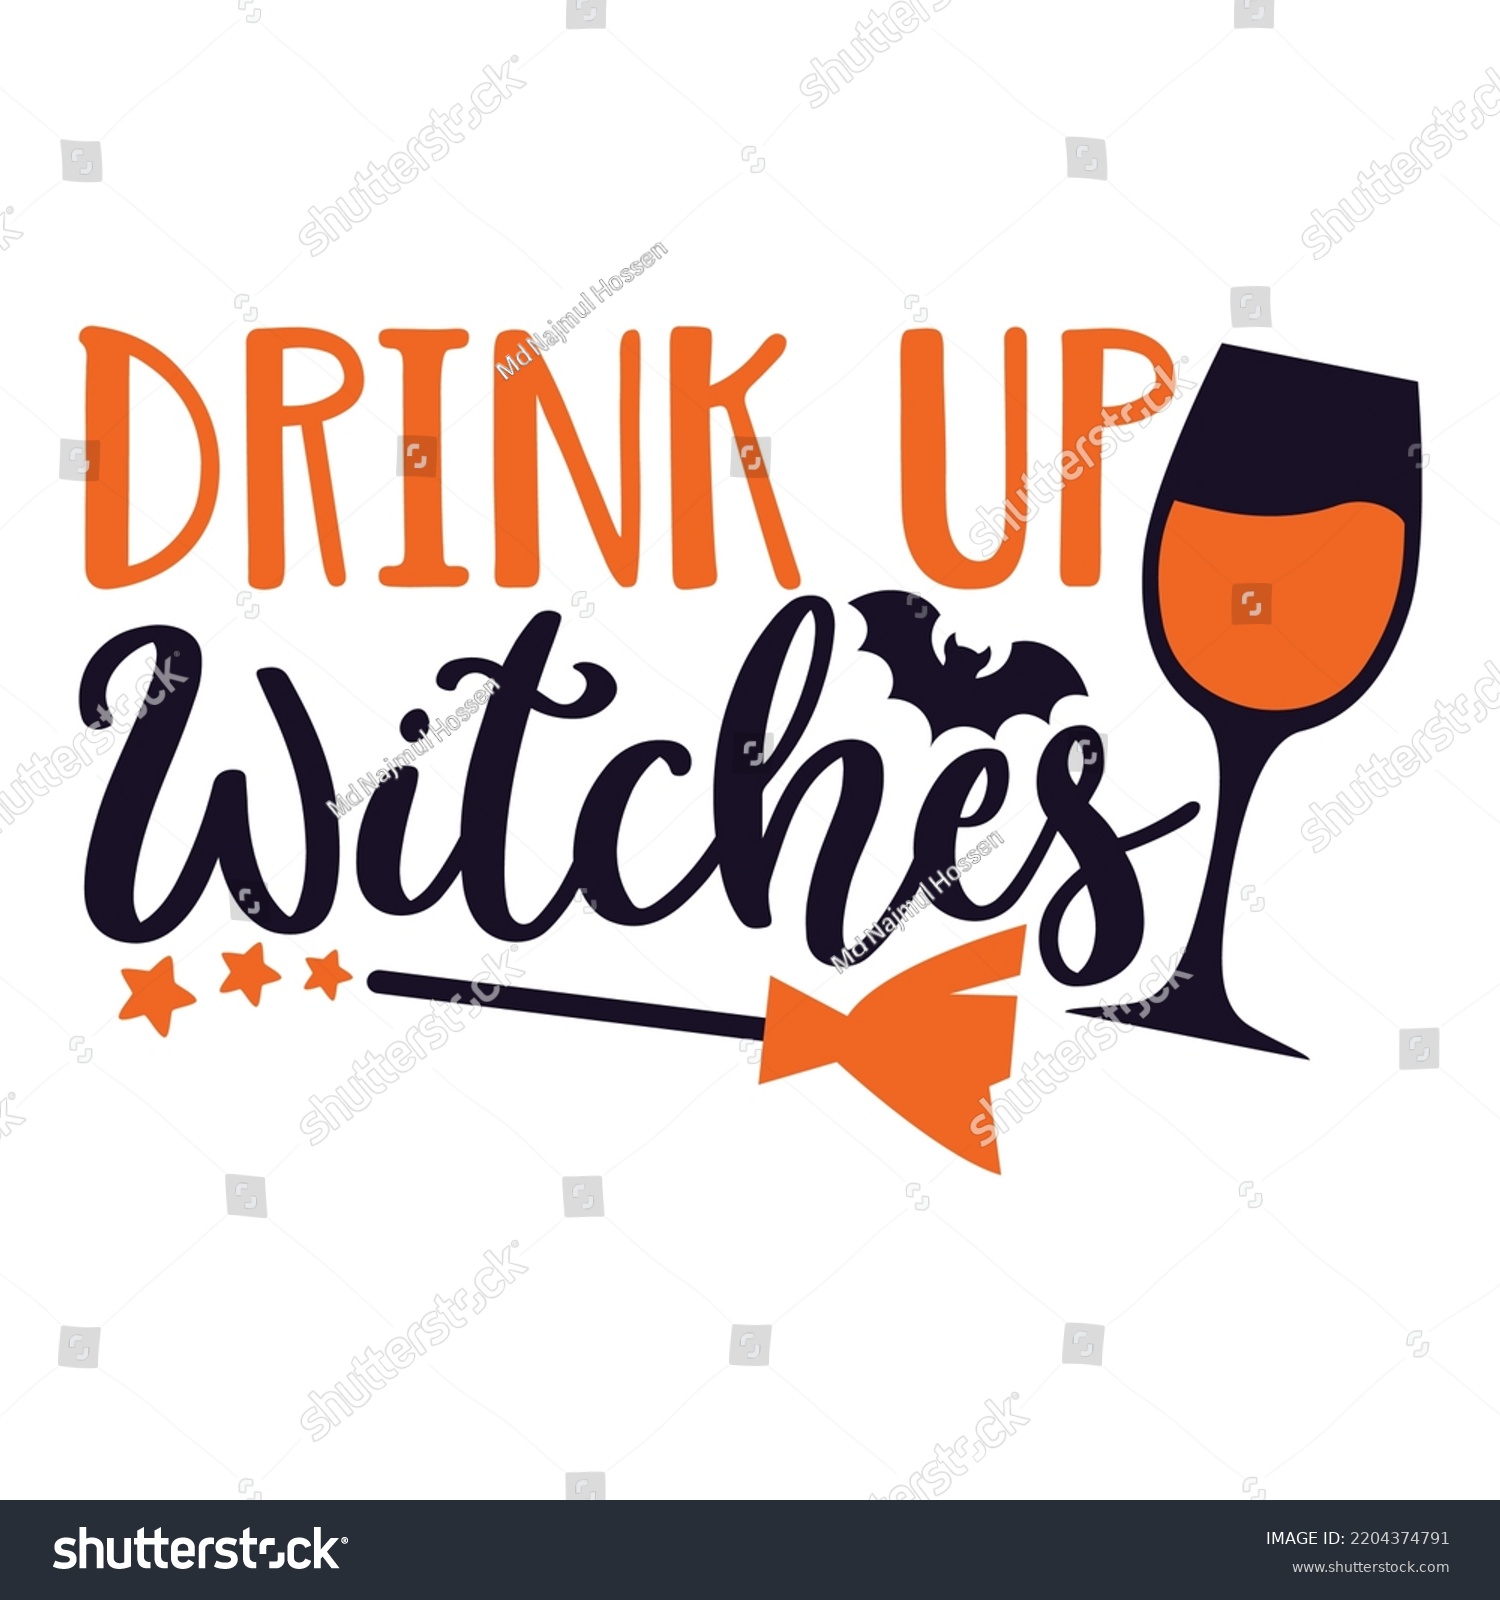 SVG of Drink Up Witches, Happy Halloween Shirt Print Template Sweeet Halloween Pumpkin candy Scary Boo Witch Spooky Bat Vintage Retro Grim Reaper Fairy hocus pocus, Sanderson sisters vector svg